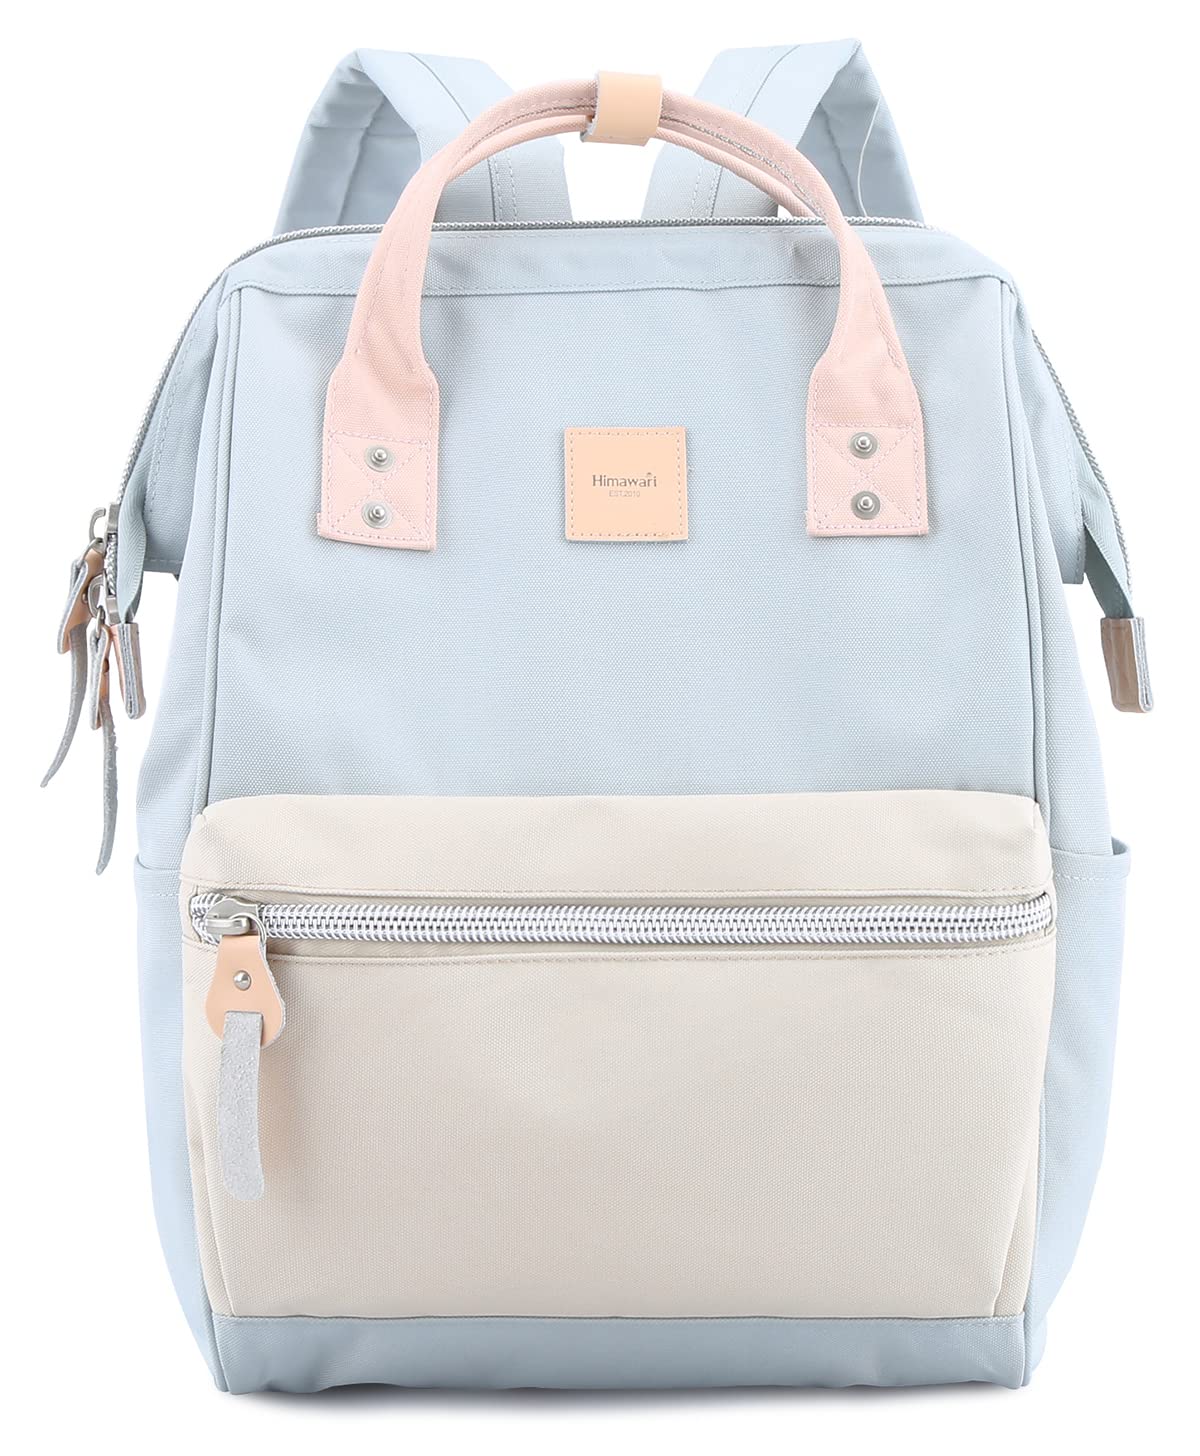 An Indispensable Fashionable School Bag For College Students